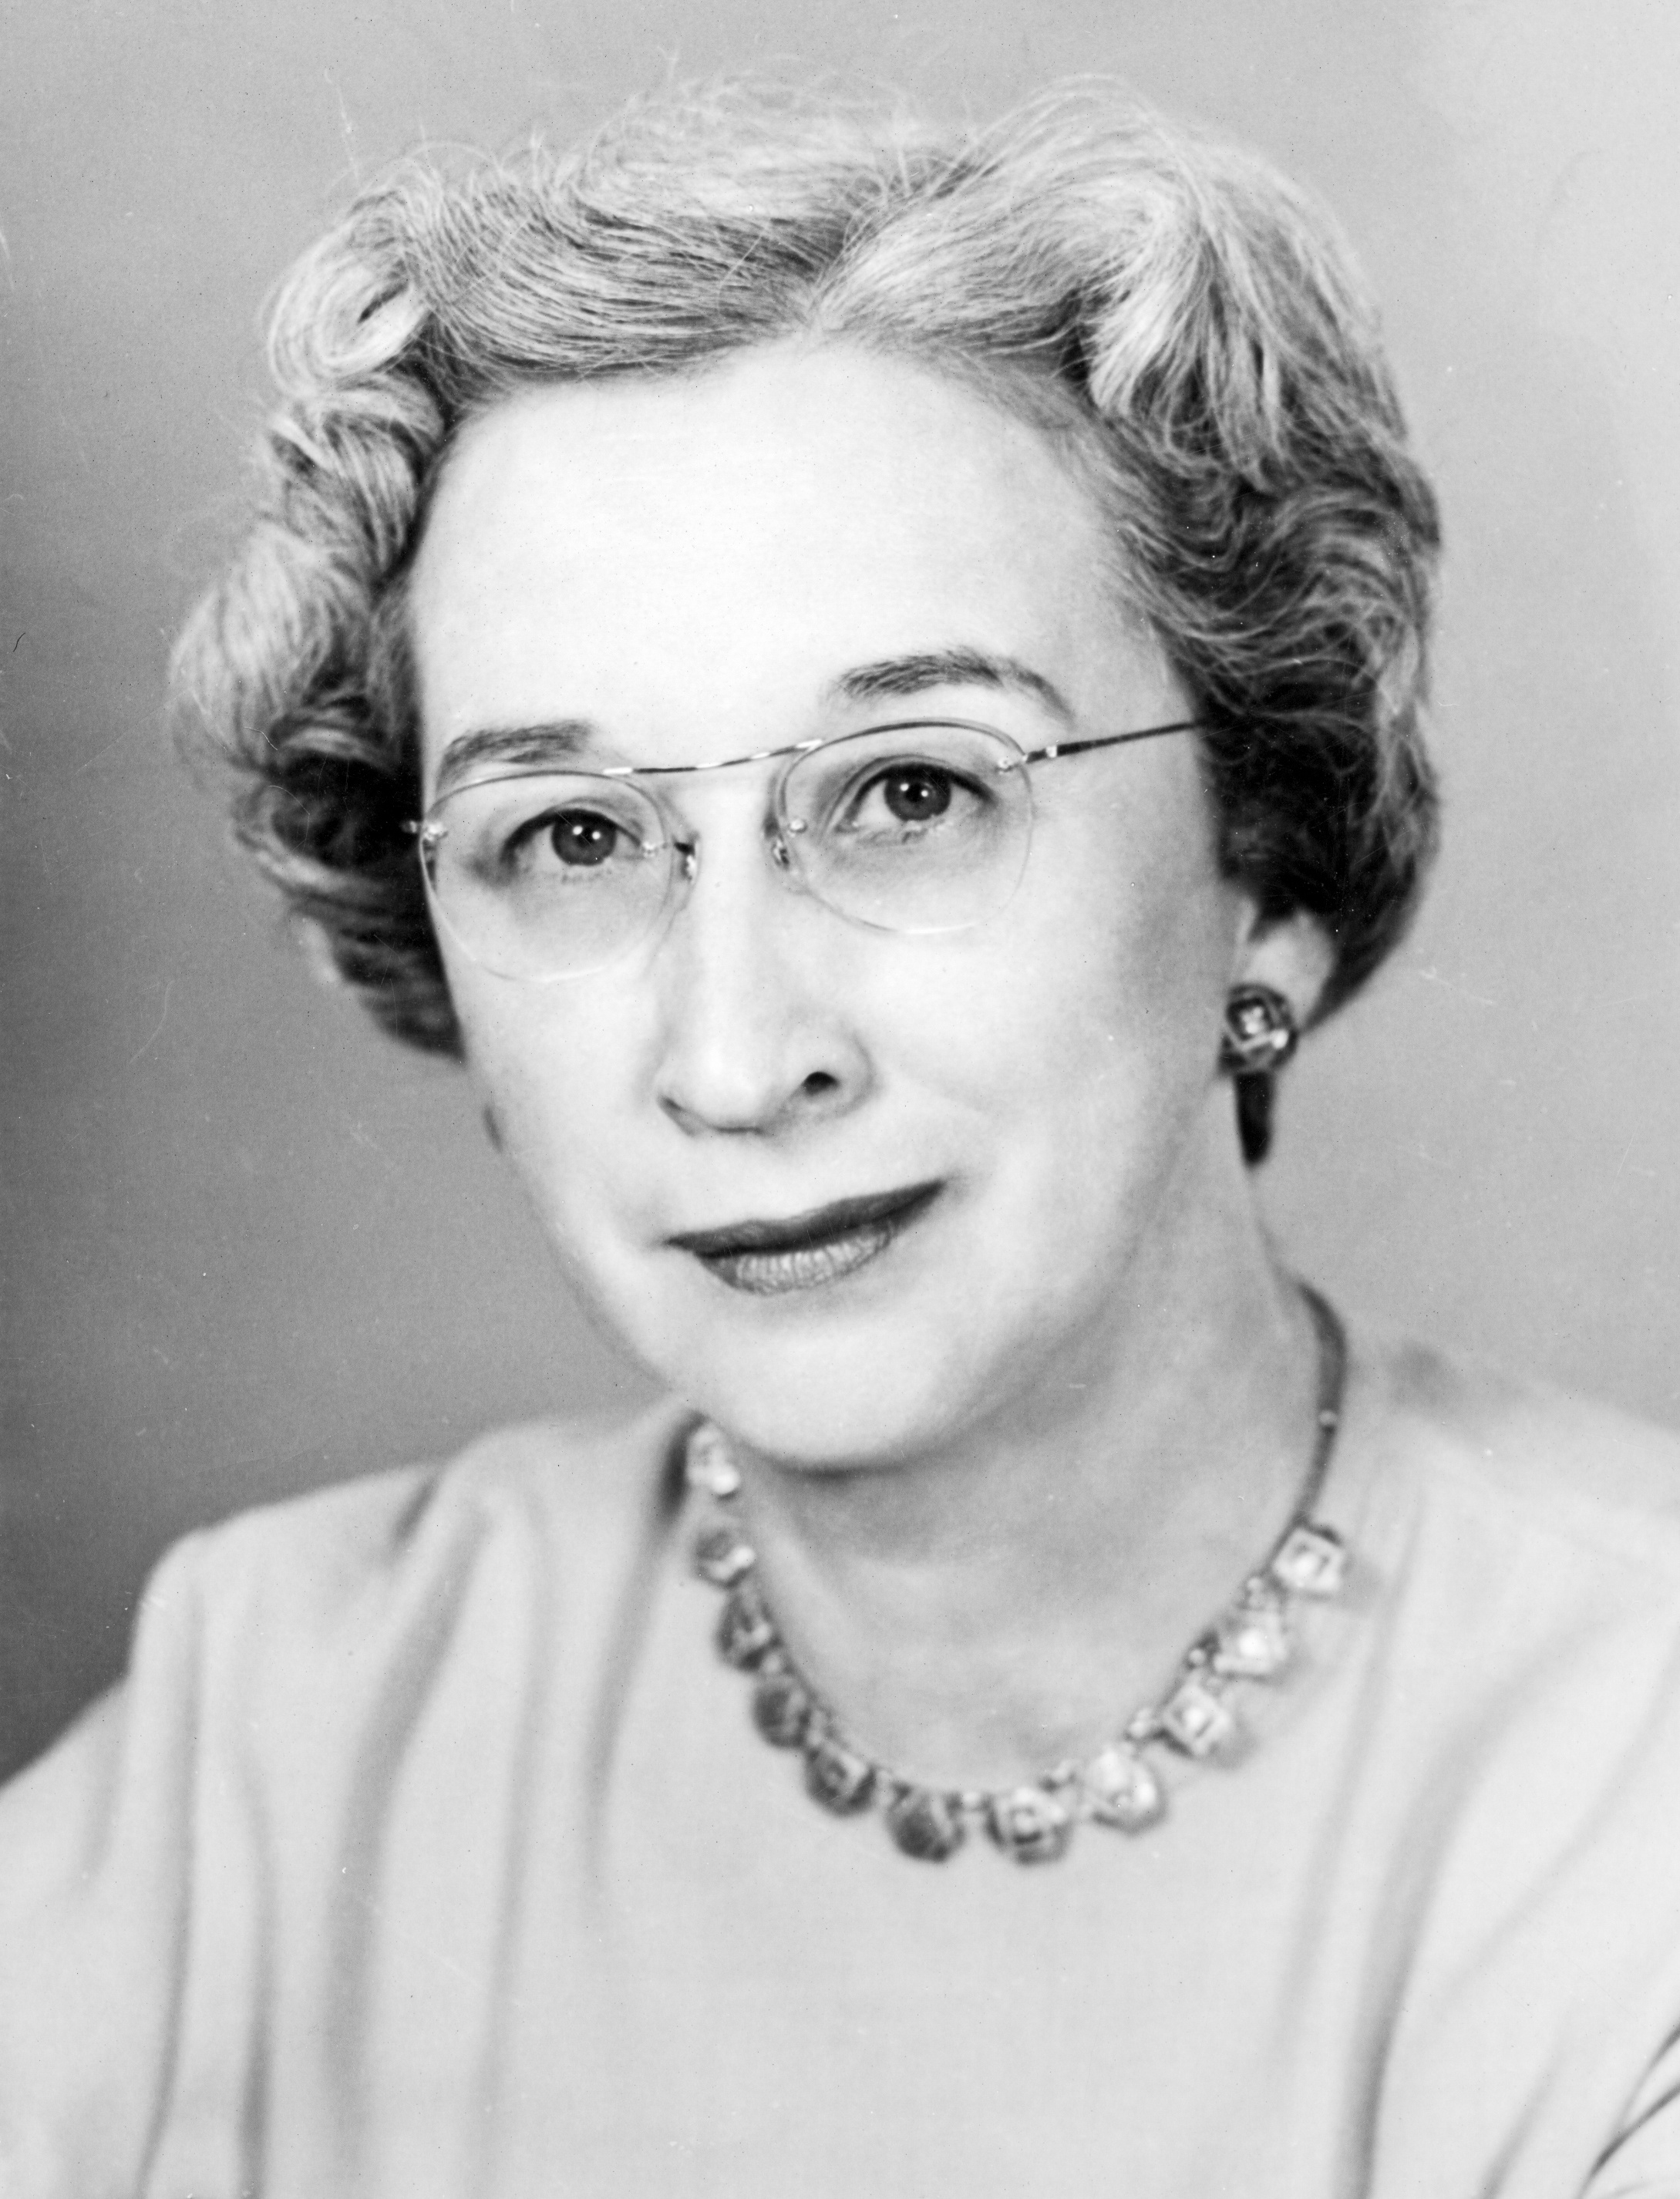 Professional photograph of Dr. Sarah Stewart wearing glasses and pearls